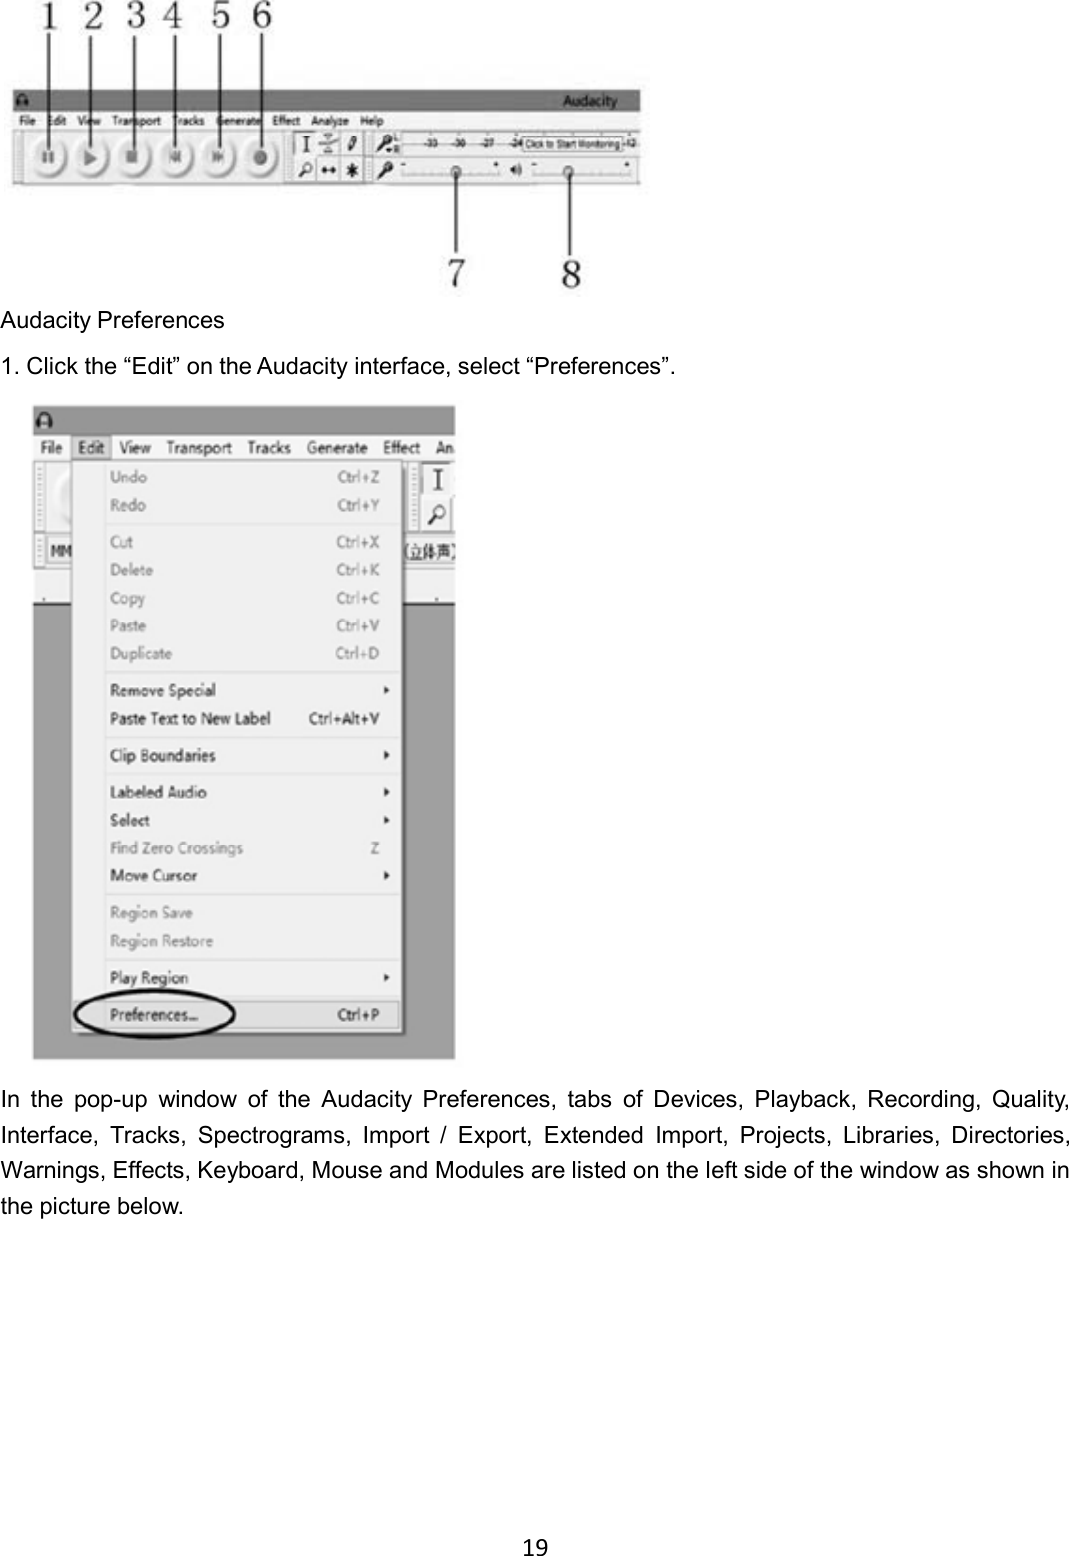 19     Audacity Preferences 1. Click the “Edit” on the Audacity interface, select “Preferences”.  In  the  pop-up  window  of  the  Audacity  Preferences,  tabs  of  Devices,  Playback,  Recording,  Quality, Interface,  Tracks,  Spectrograms,  Import  /  Export,  Extended  Import,  Projects,  Libraries,  Directories, Warnings, Effects, Keyboard, Mouse and Modules are listed on the left side of the window as shown in the picture below.  